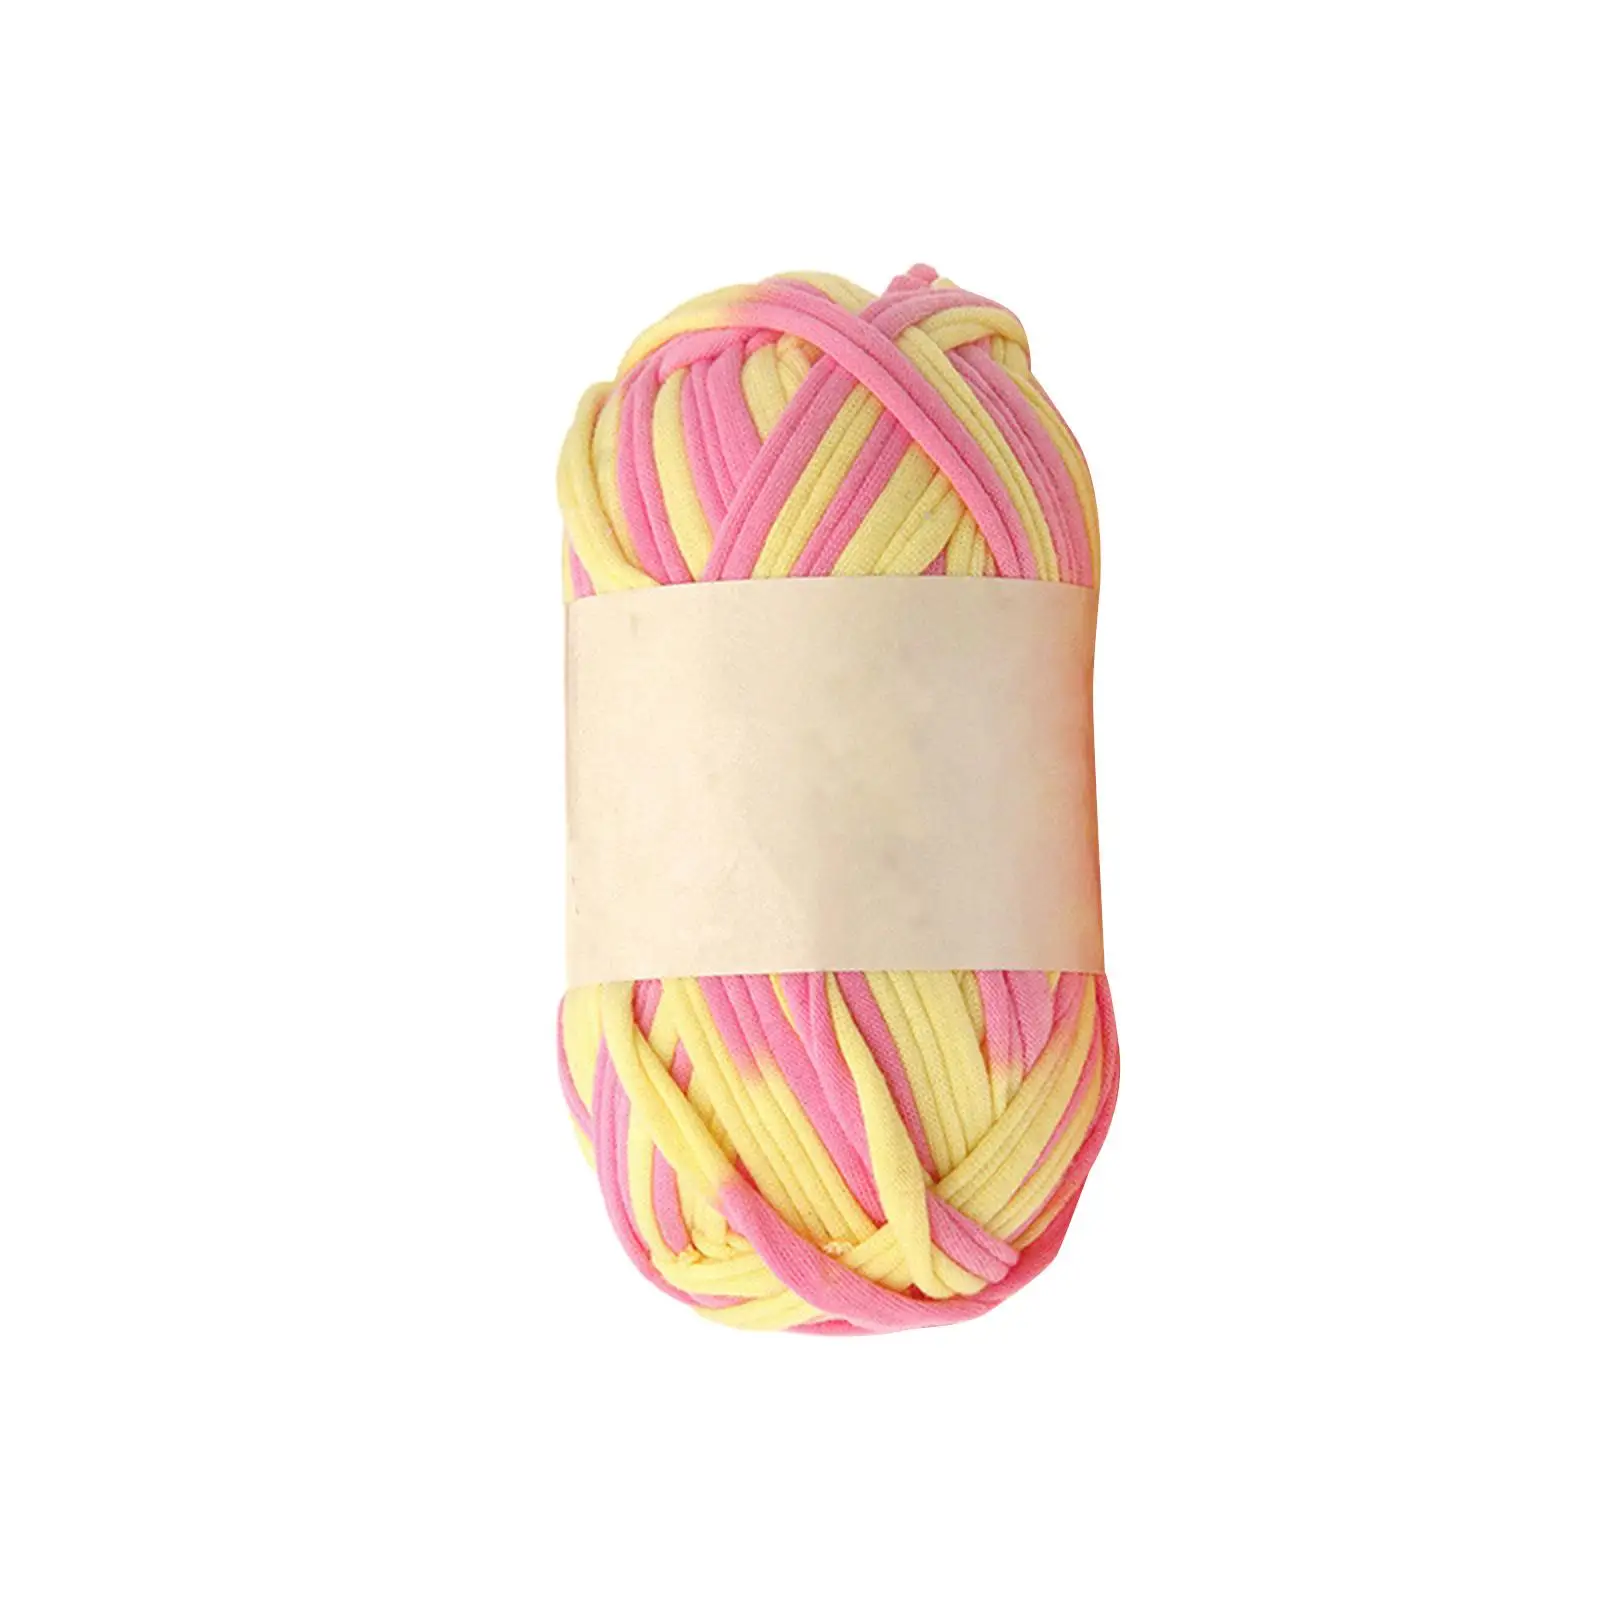 Knitted Yarn Bag Making Supplies Weaving Thread Easy to Knit Carpet Yarn T Shirt Yarn for Rugs Coasters Pillow Baskets Cushion